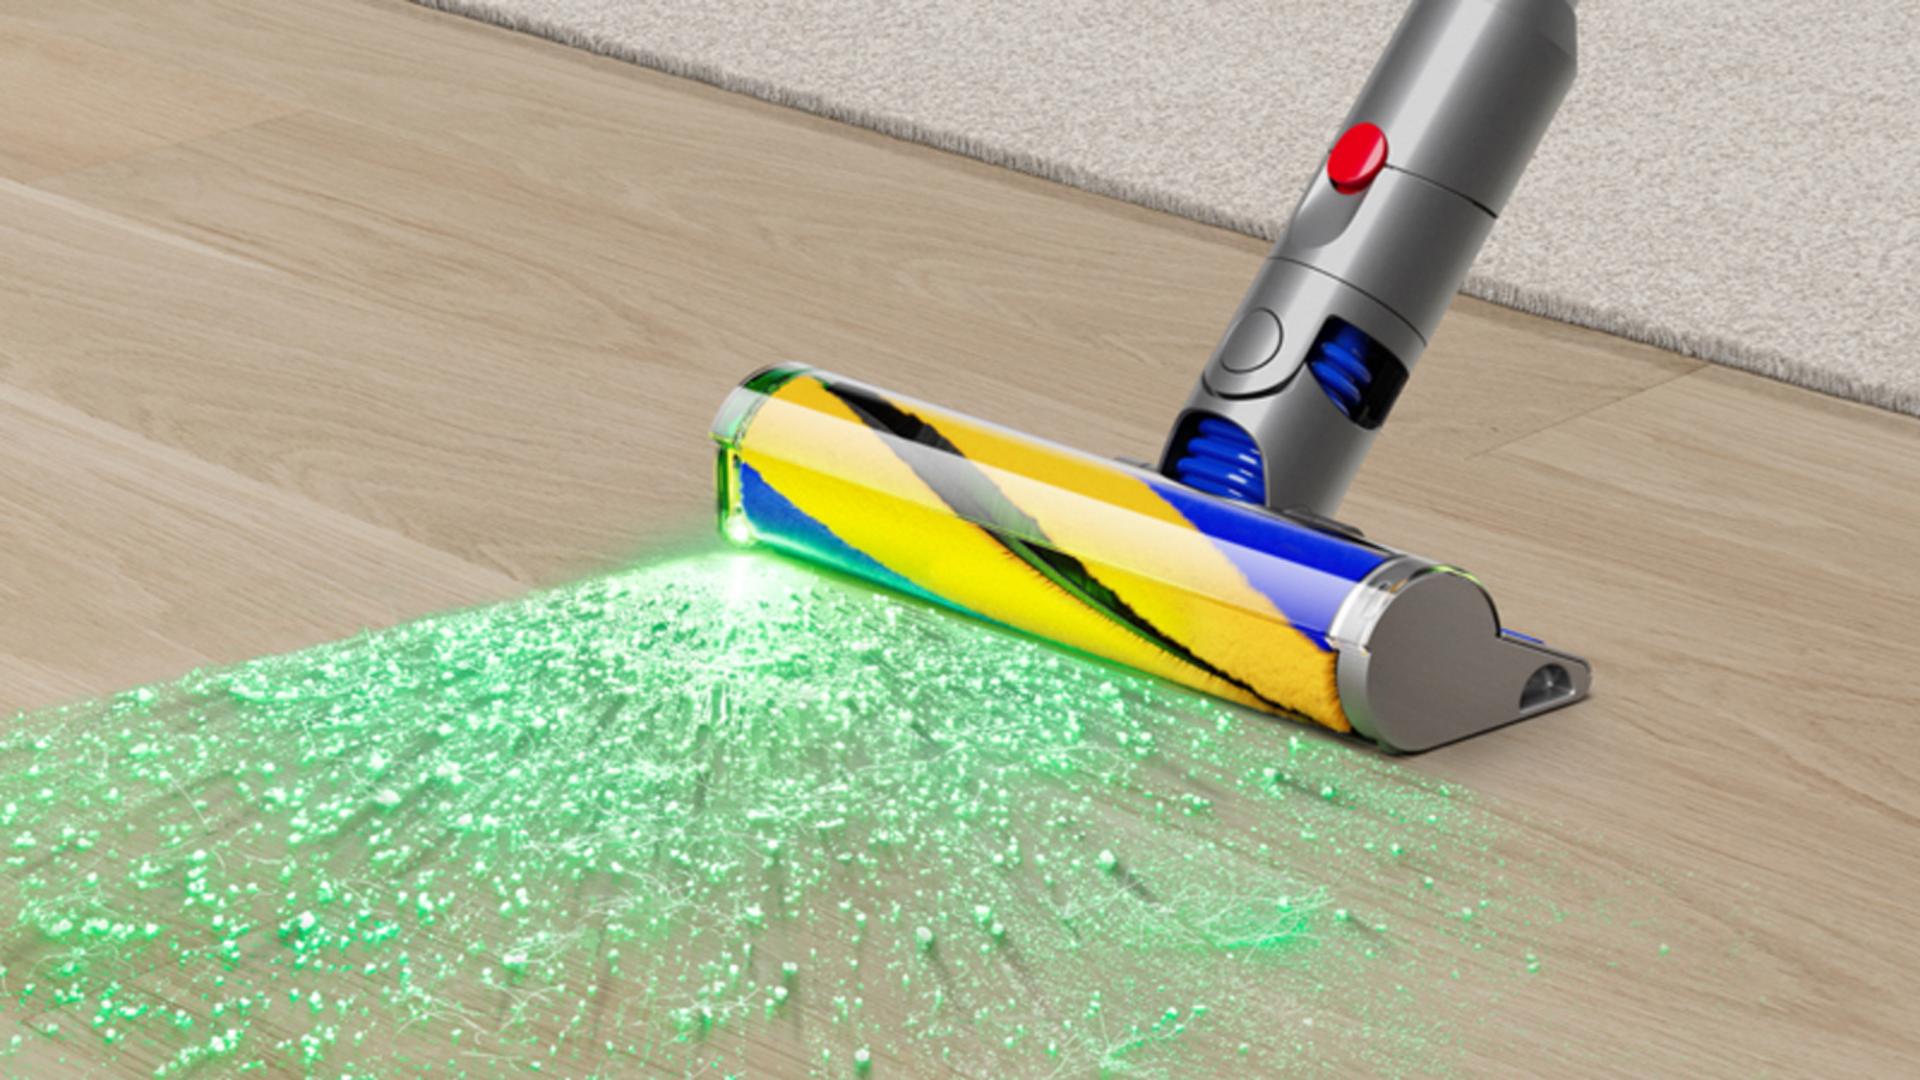 The Digital Motorbar™ cleaner head powerfully removes dirt and hair from all floors. Hair-removal vanes automatically de-tangle long hair and pet hair.